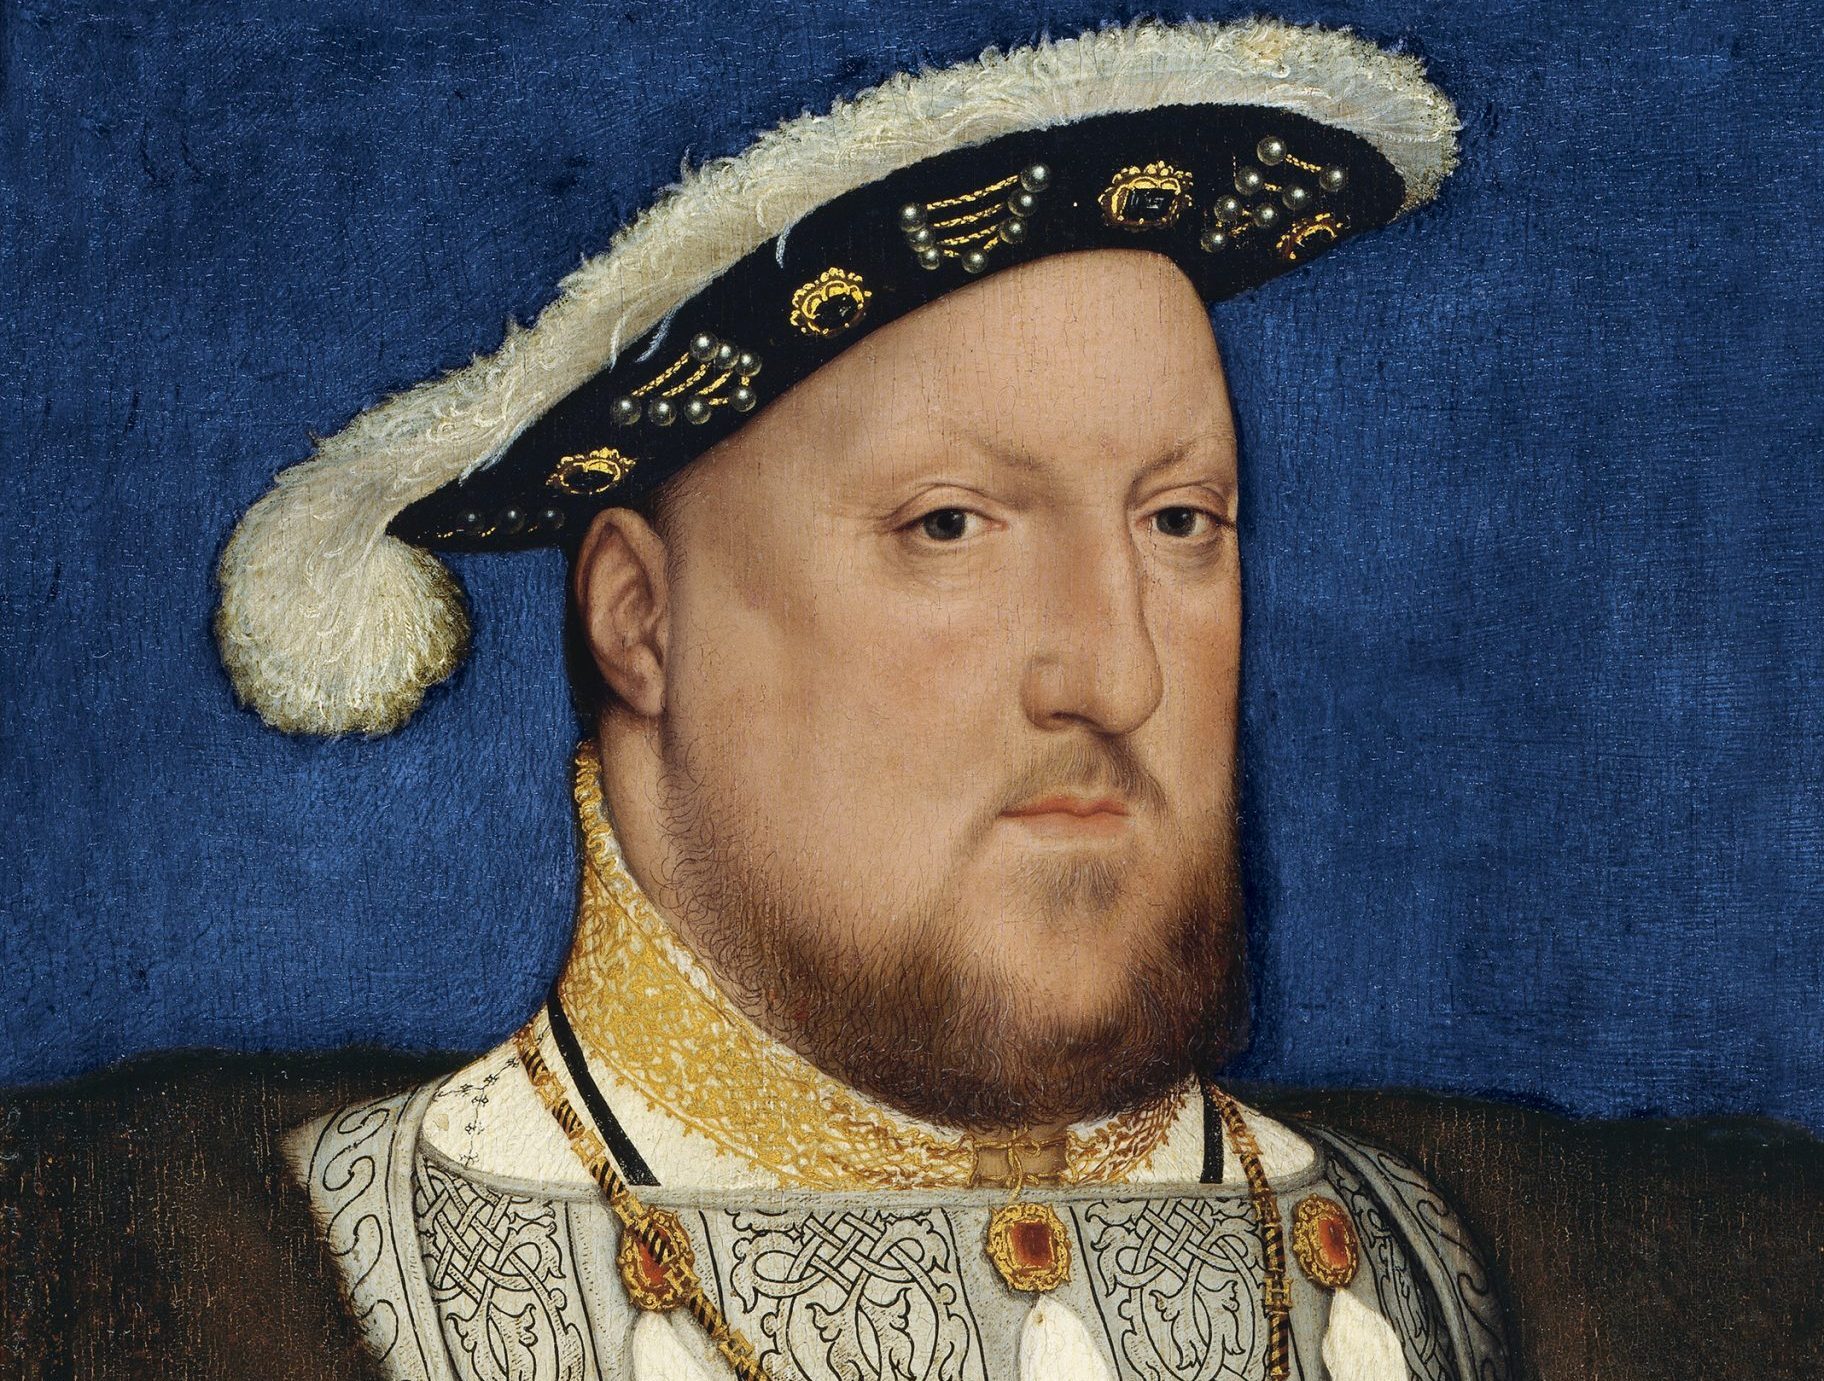 Hans Holbein the Younger, Portrait of Henry VIII of England, ca. 1537, Museo Nacional Thyssen-Bornemisza, Madrid, Spain. 